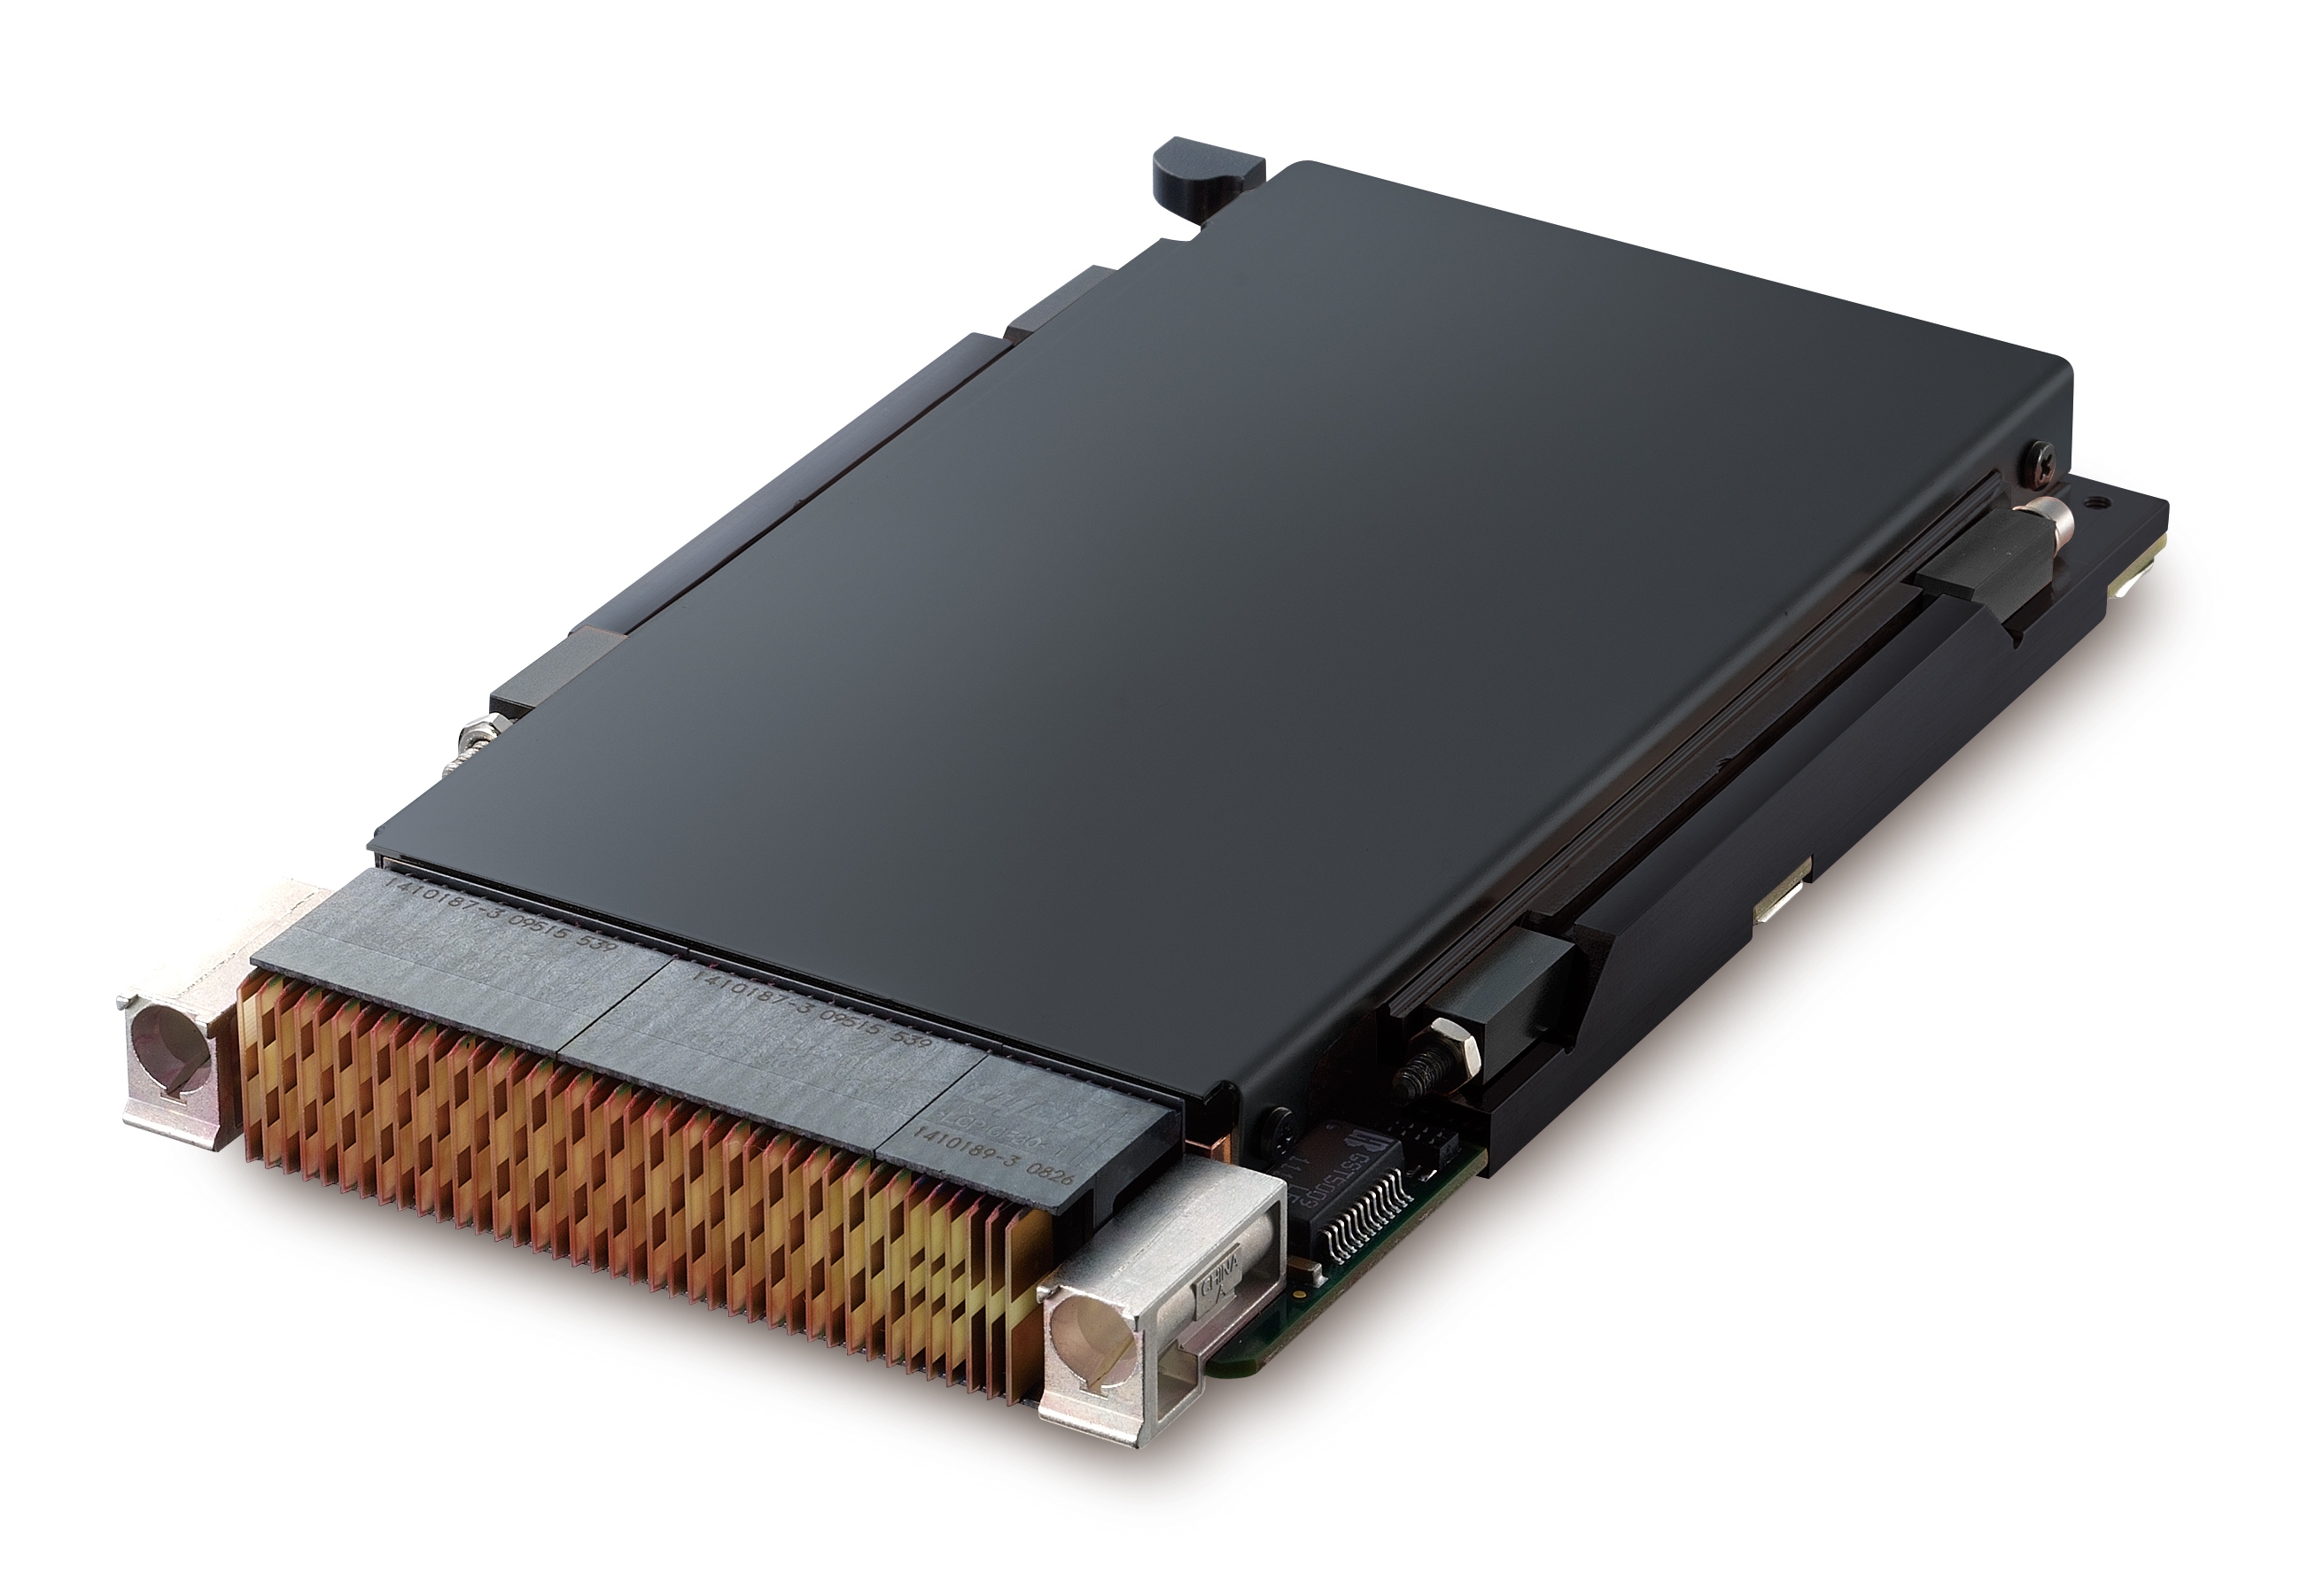 Rugged 3U VPX Blade with NVIDIA® Quadro GPU MXM Module for data and image processing in harsh environments